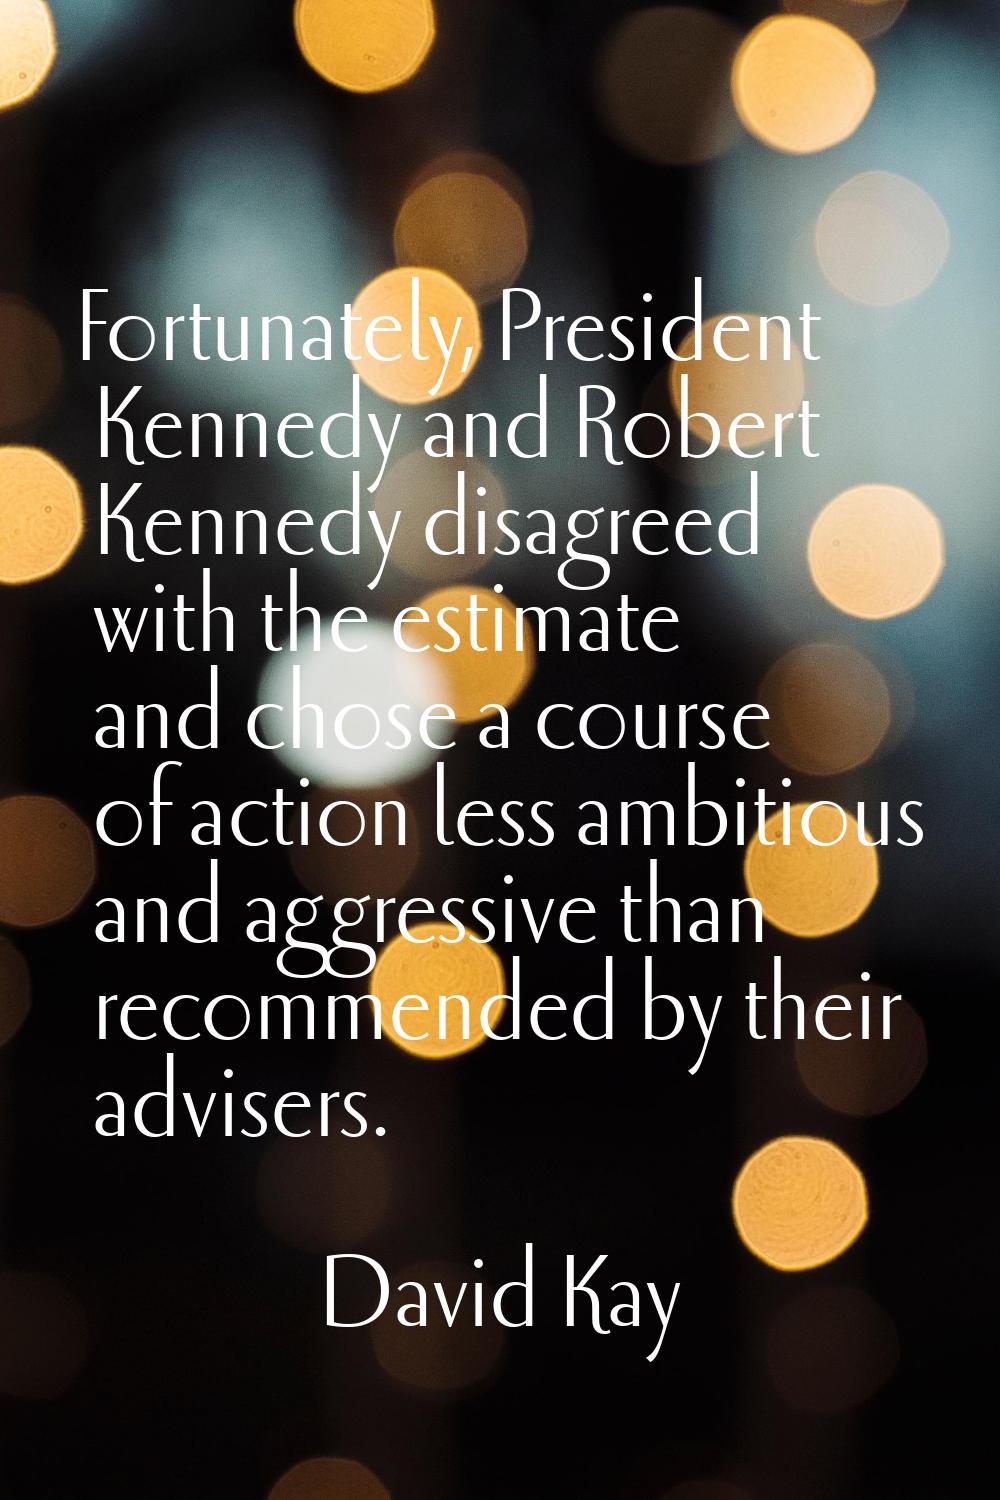 Fortunately, President Kennedy and Robert Kennedy disagreed with the estimate and chose a course of